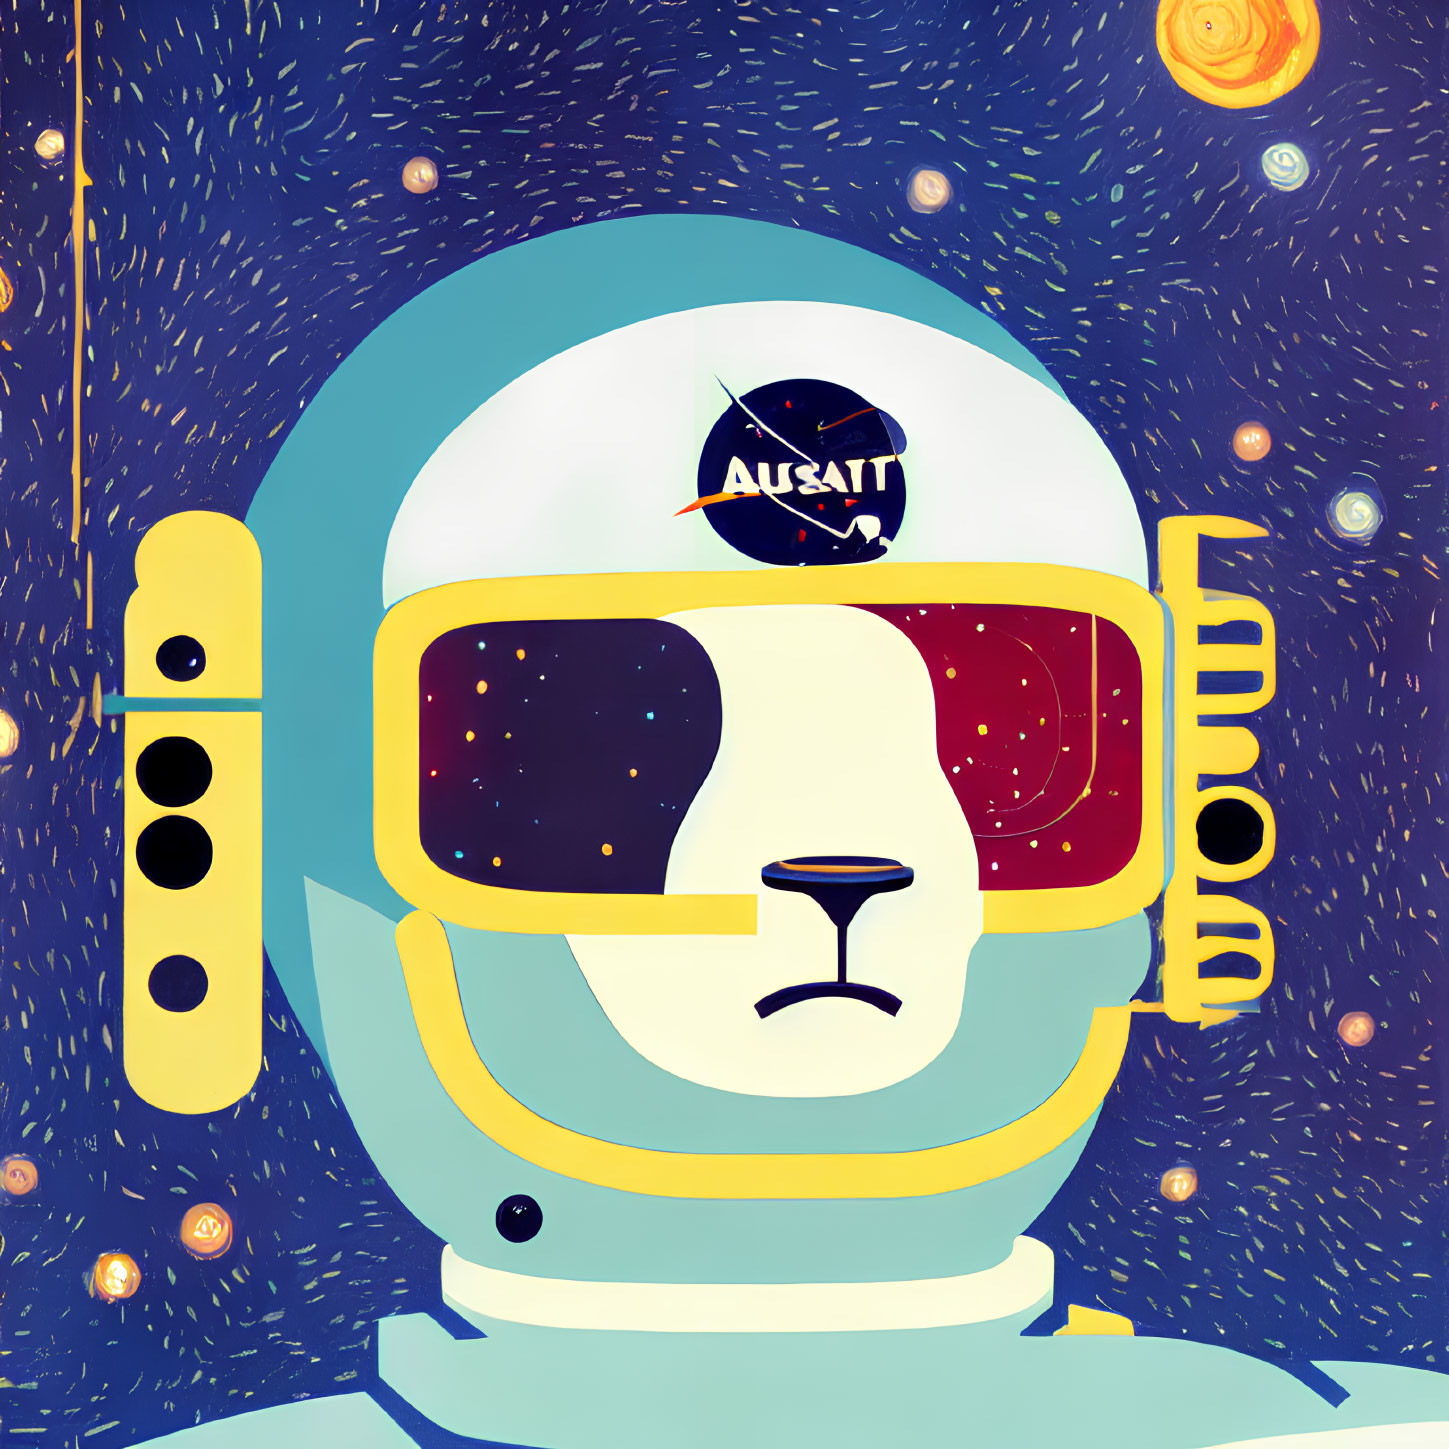 Stylized astronaut helmet with starry cosmos reflection and spacecraft insignia